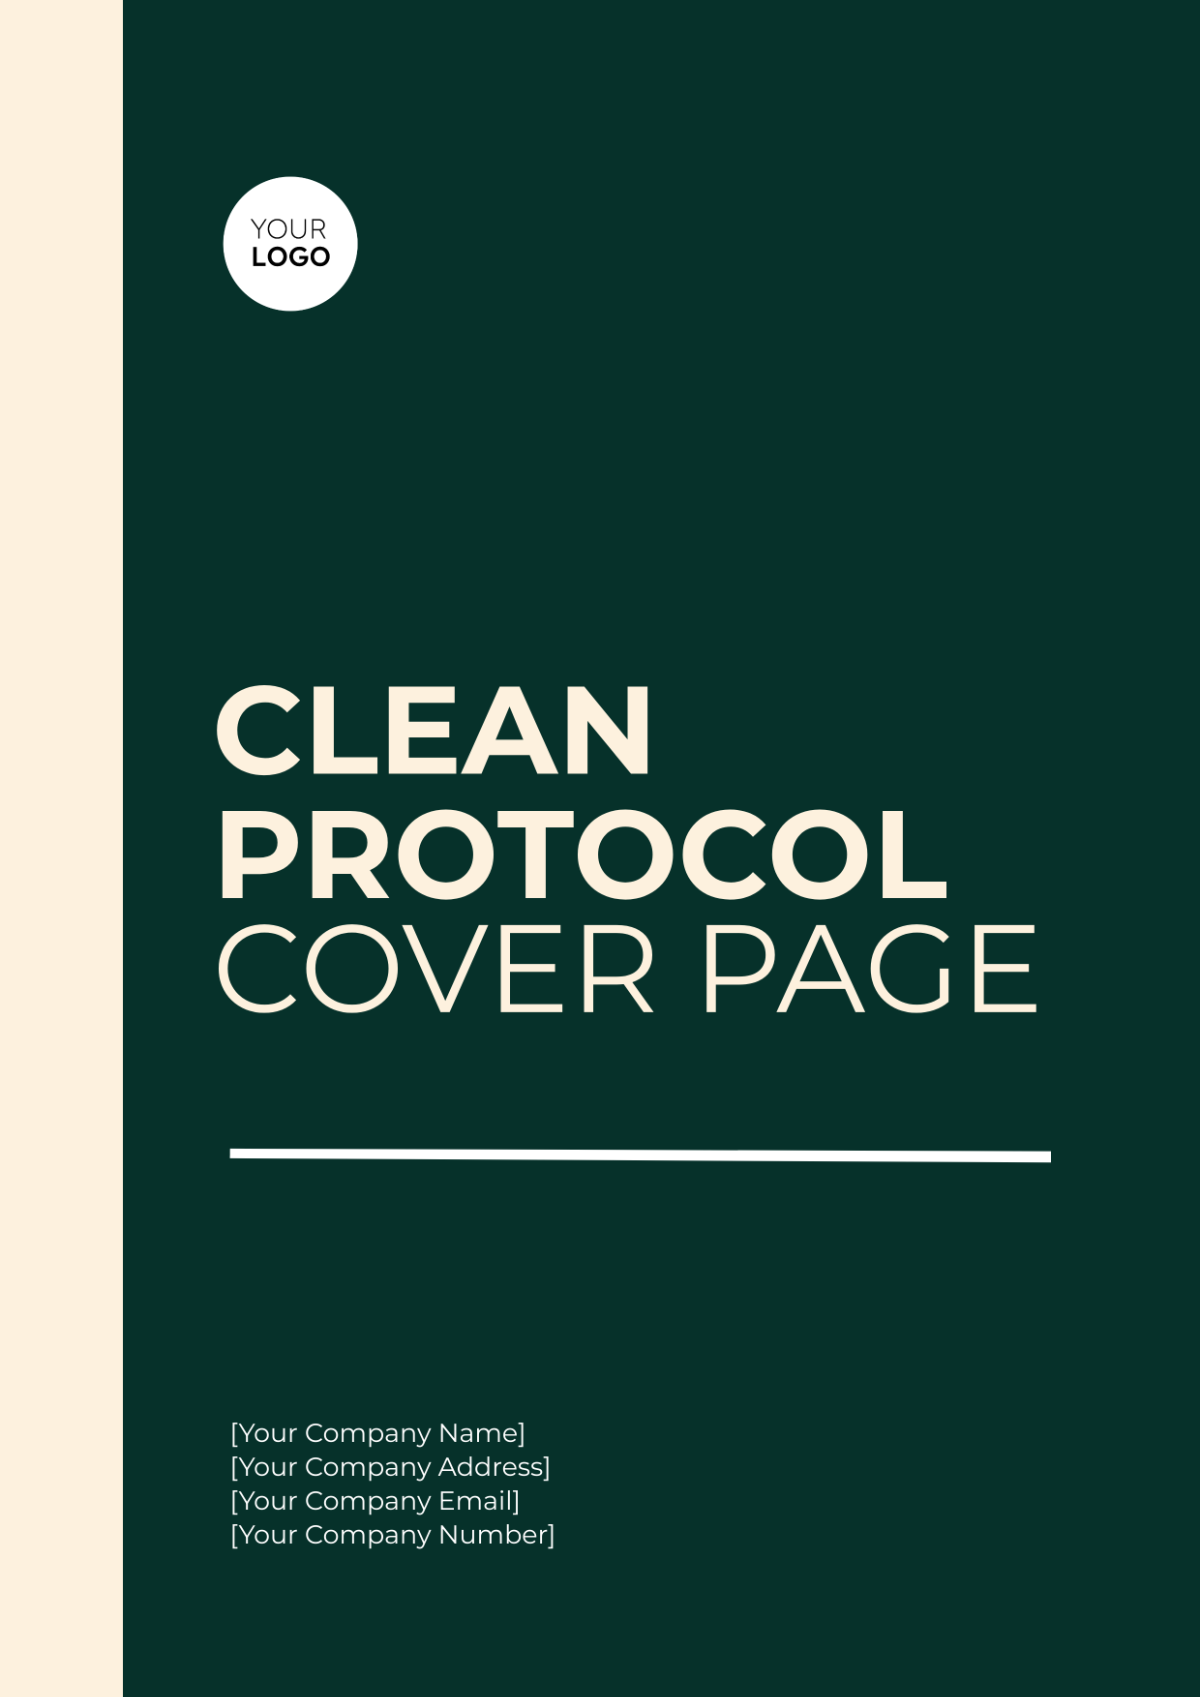 Clean Protocol Cover Page